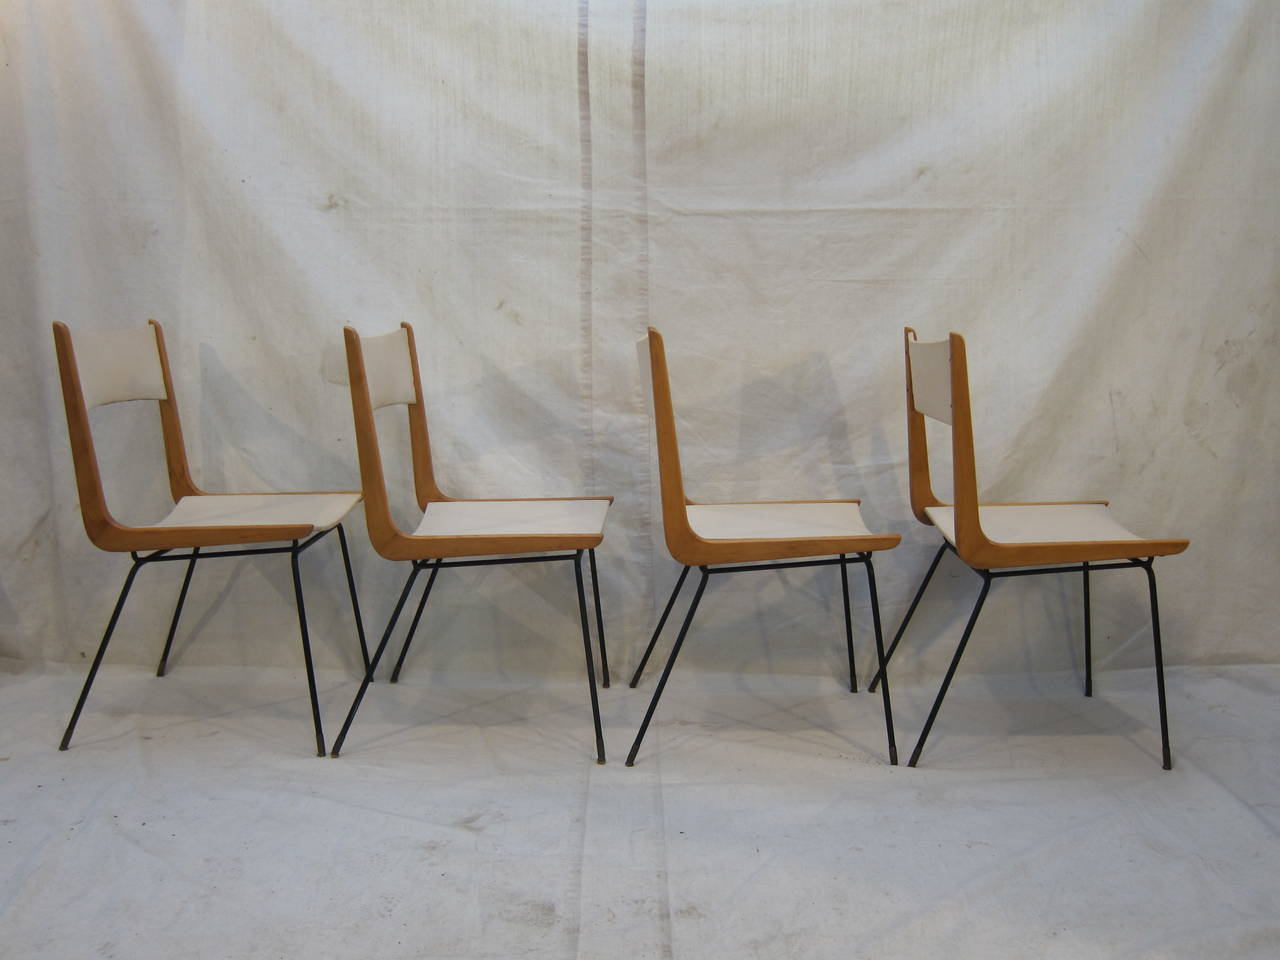 Rare set of four Carlo Di Carli Boomerang dining Chairs. Original Lorica covering. In good original condition. Iron with bronze feet, Ash wood boomerang frames connecting seat and backrest to legs.  New covering is recommended.